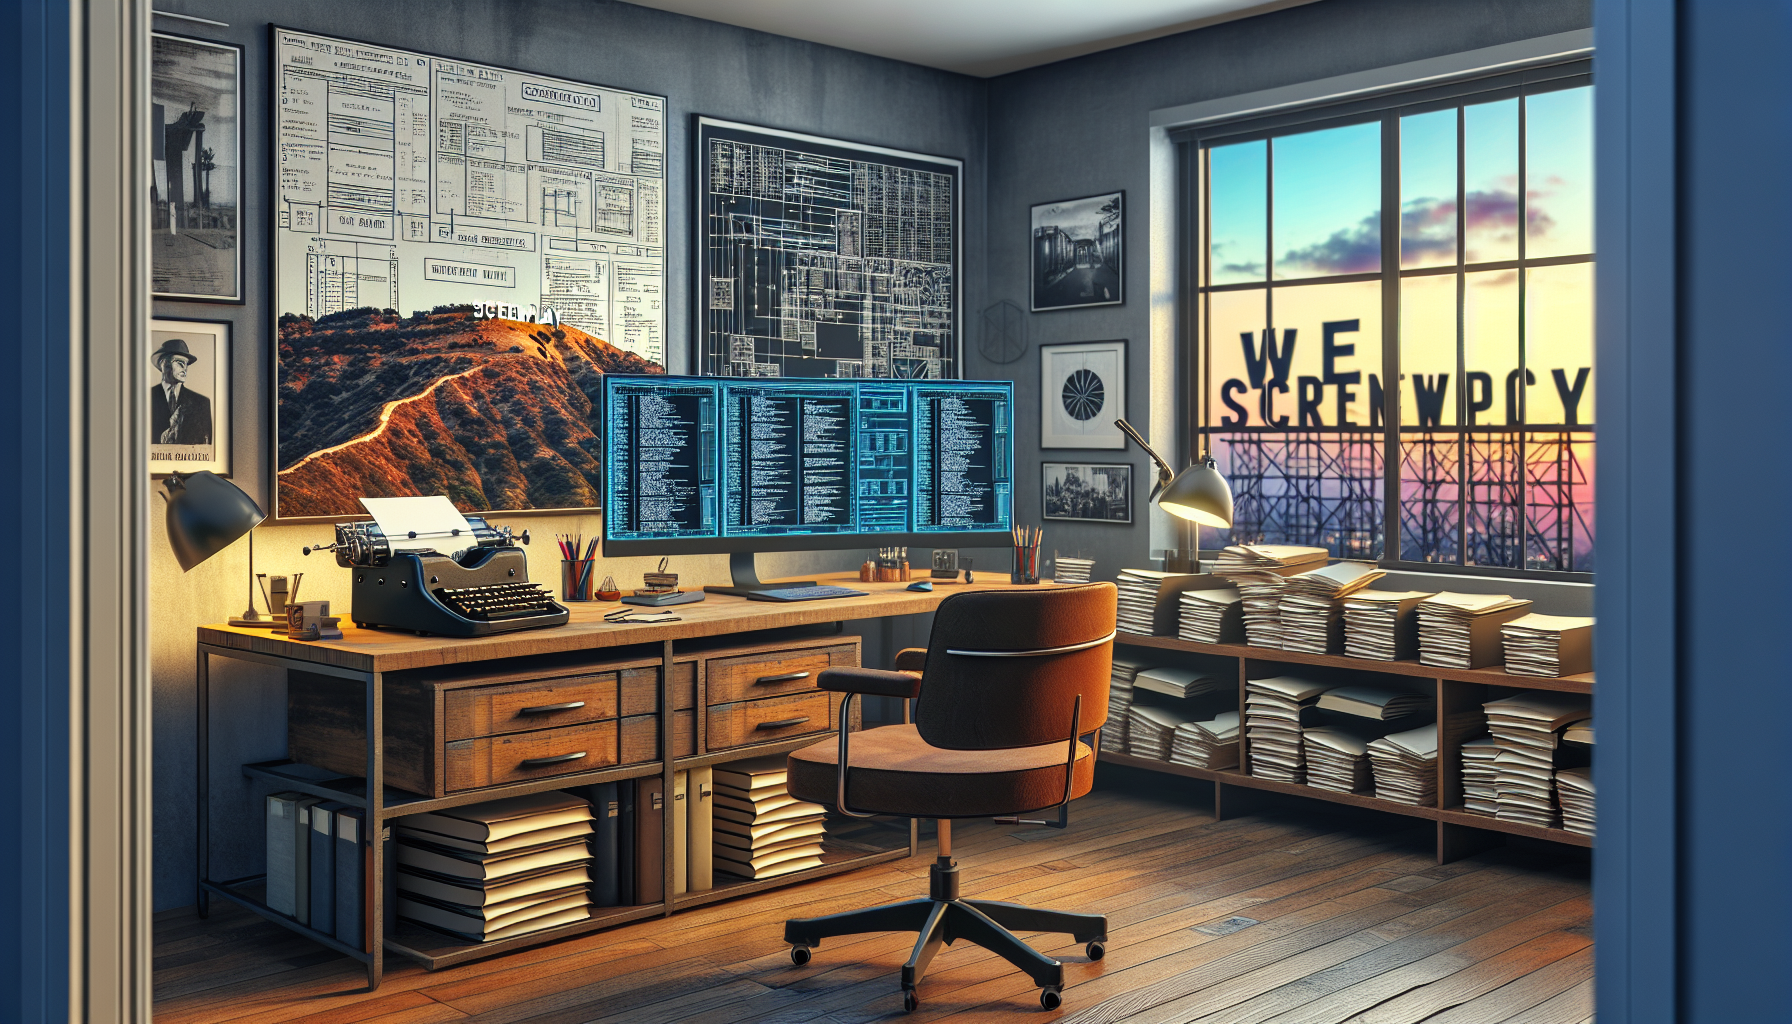 An artist's studio with a vintage typewriter, a stack of screenplay manuscripts with perfect formatting, and a large, illuminated computer screen displaying screenplay writing software. On the walls,